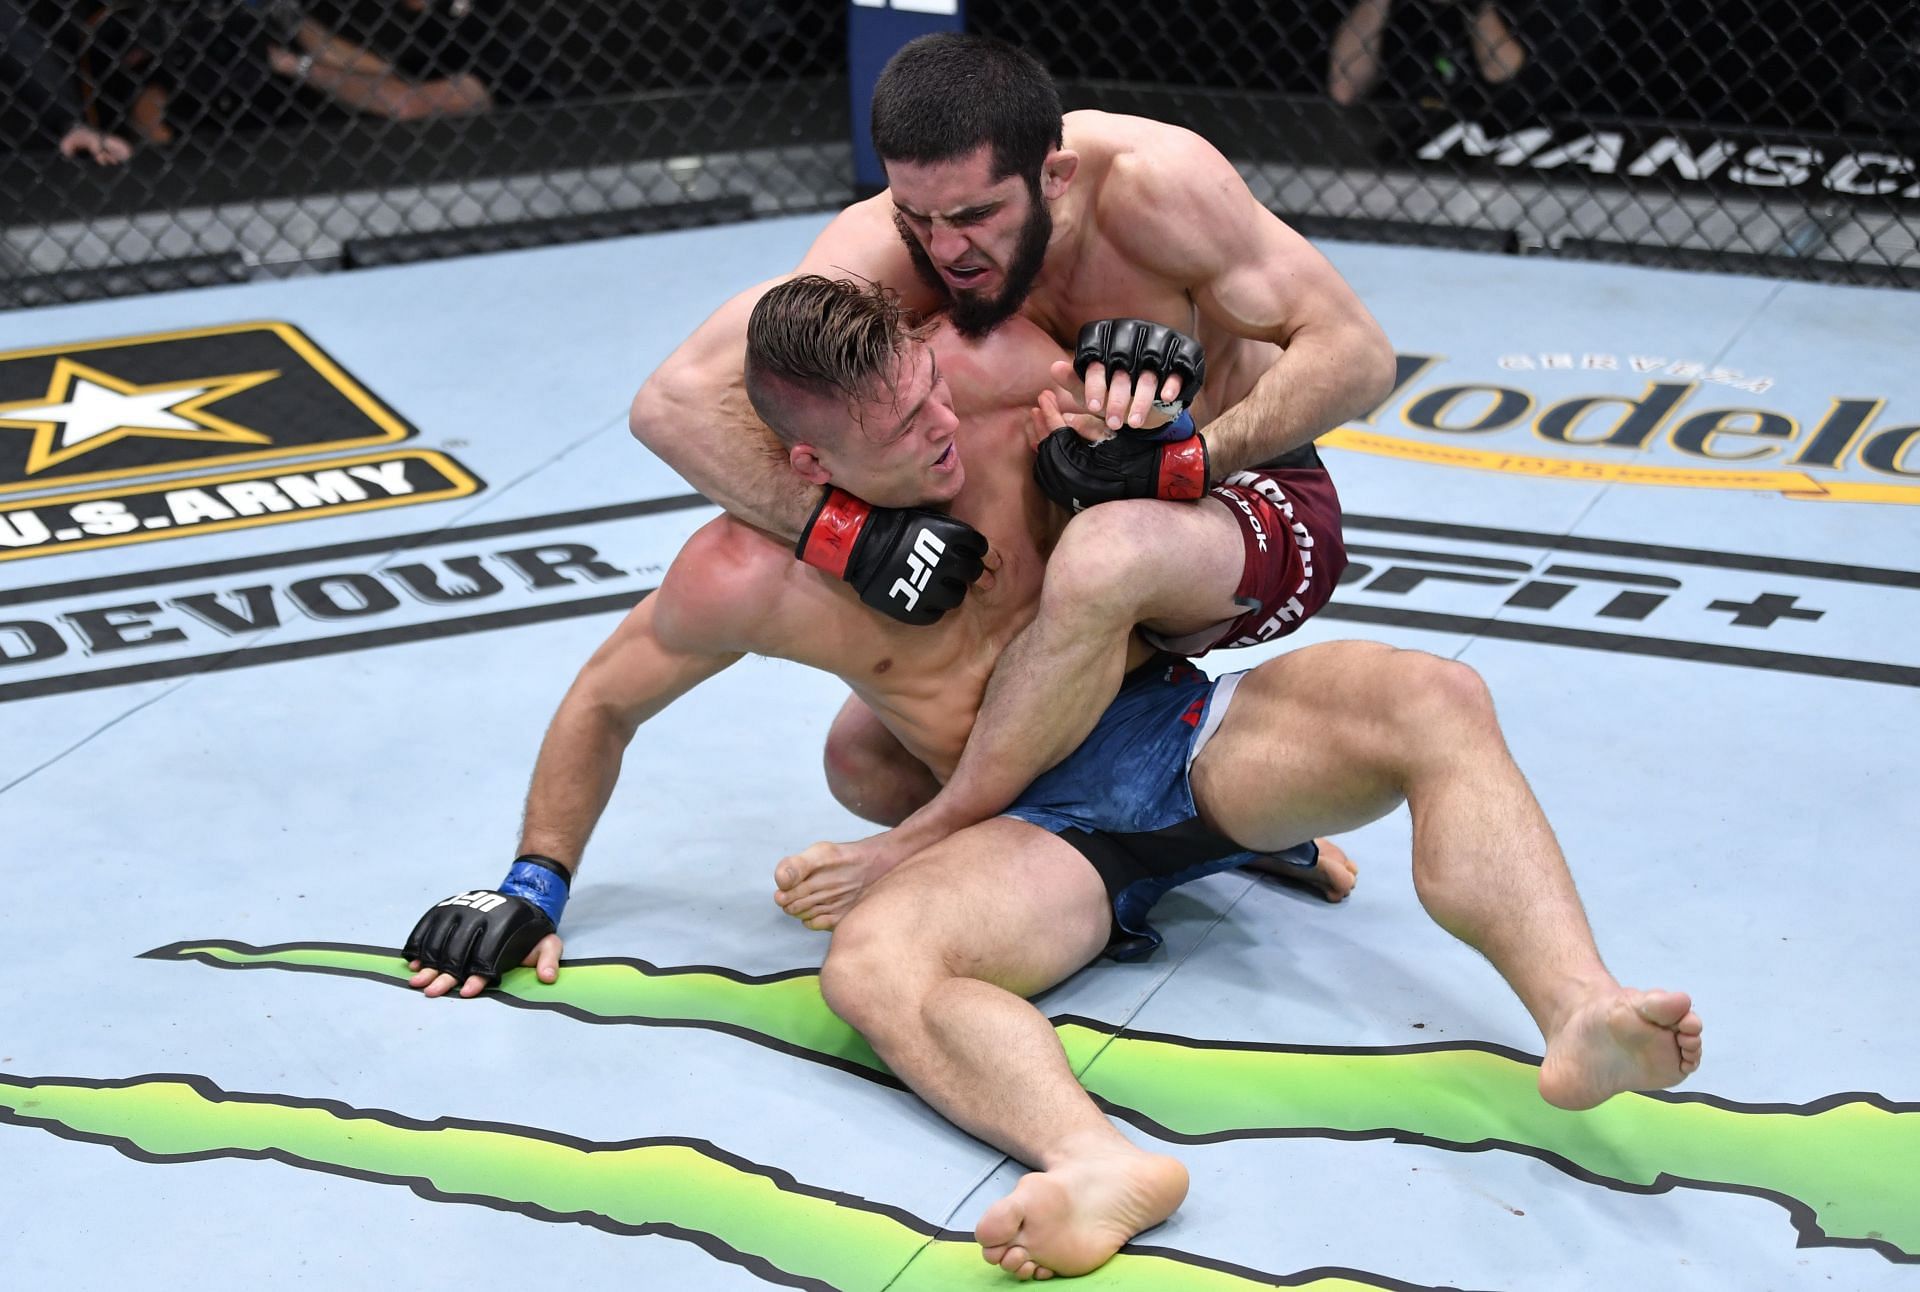 Islam Makhachev in action against Drew Dober at UFC 259